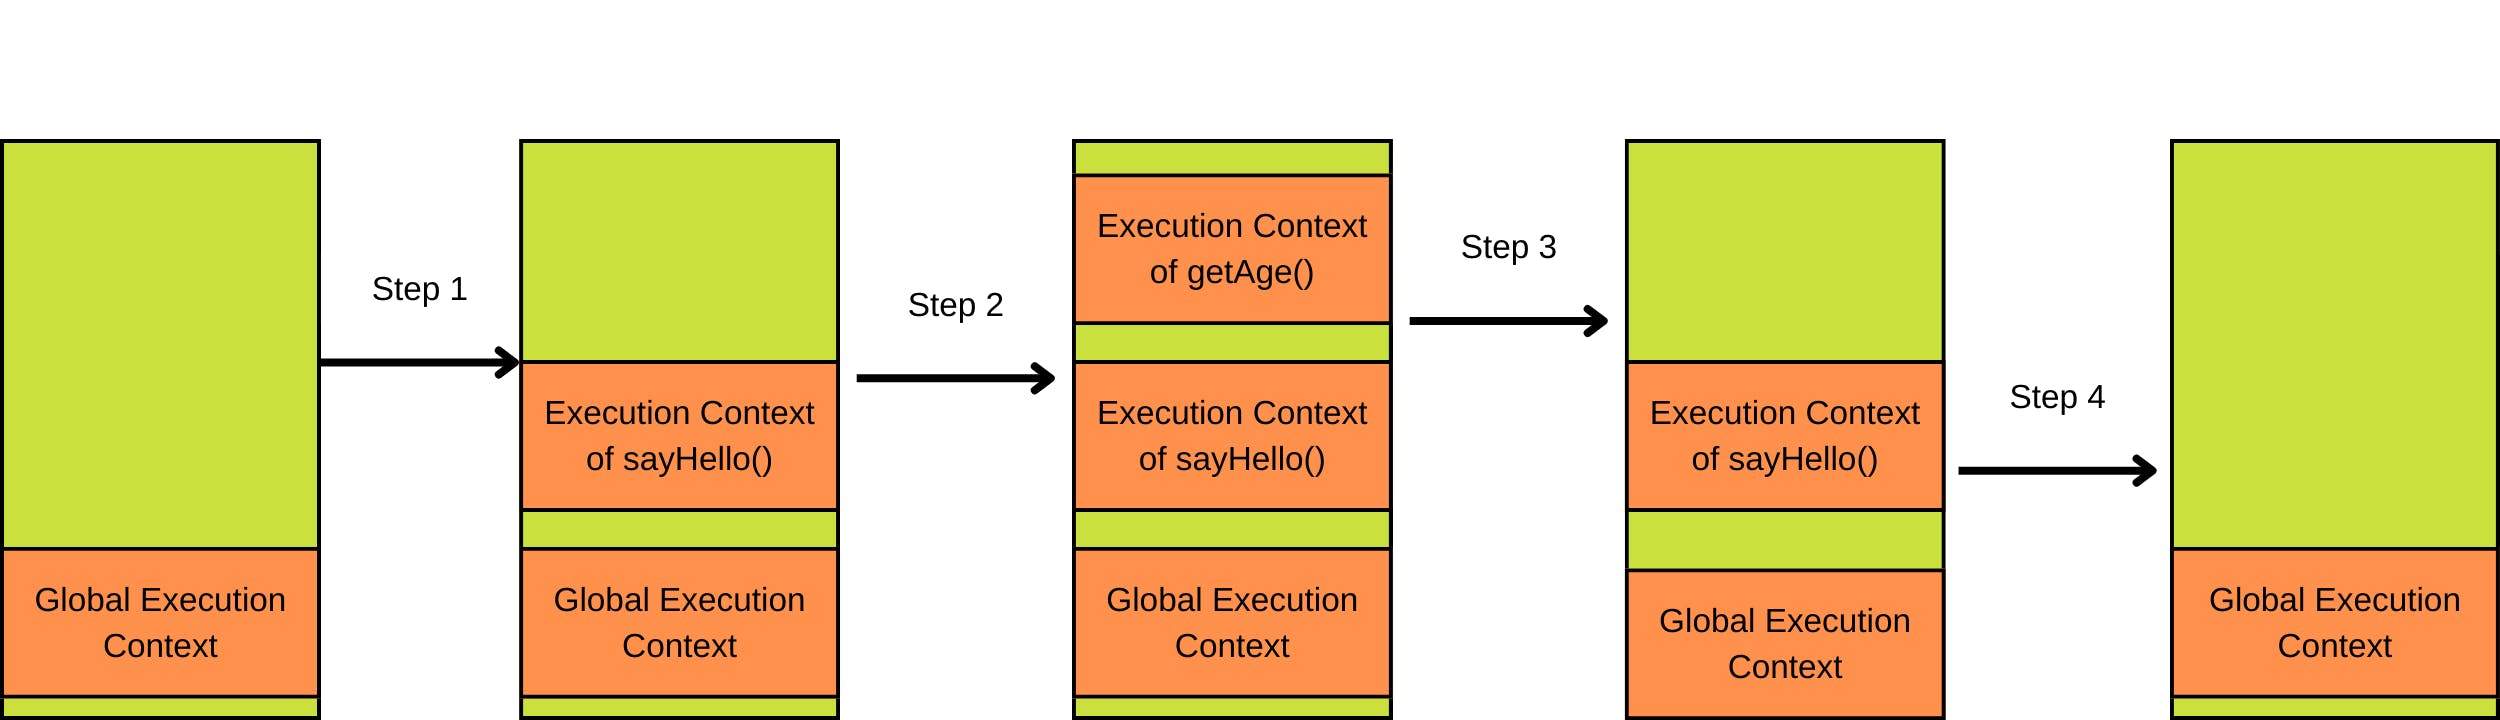 Execution Context of sayHello() (1).png